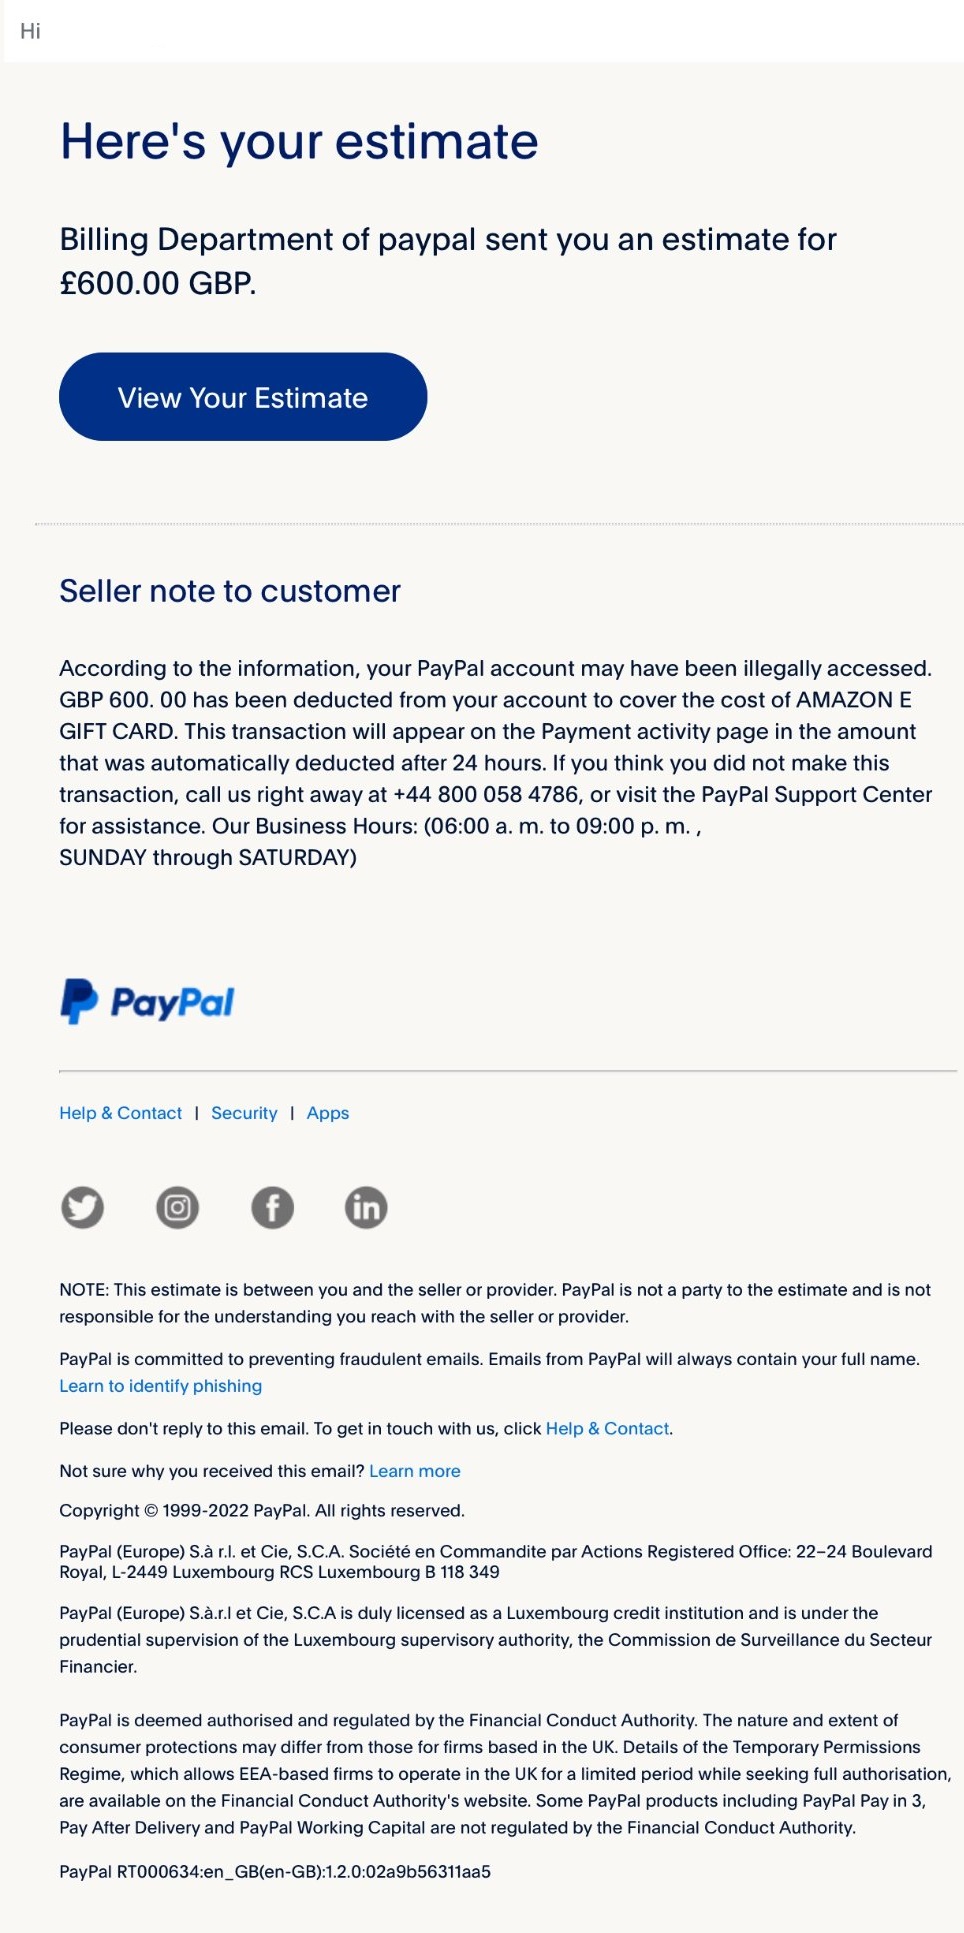 PayPal Estimate Scam from Billing Department Invoice Email